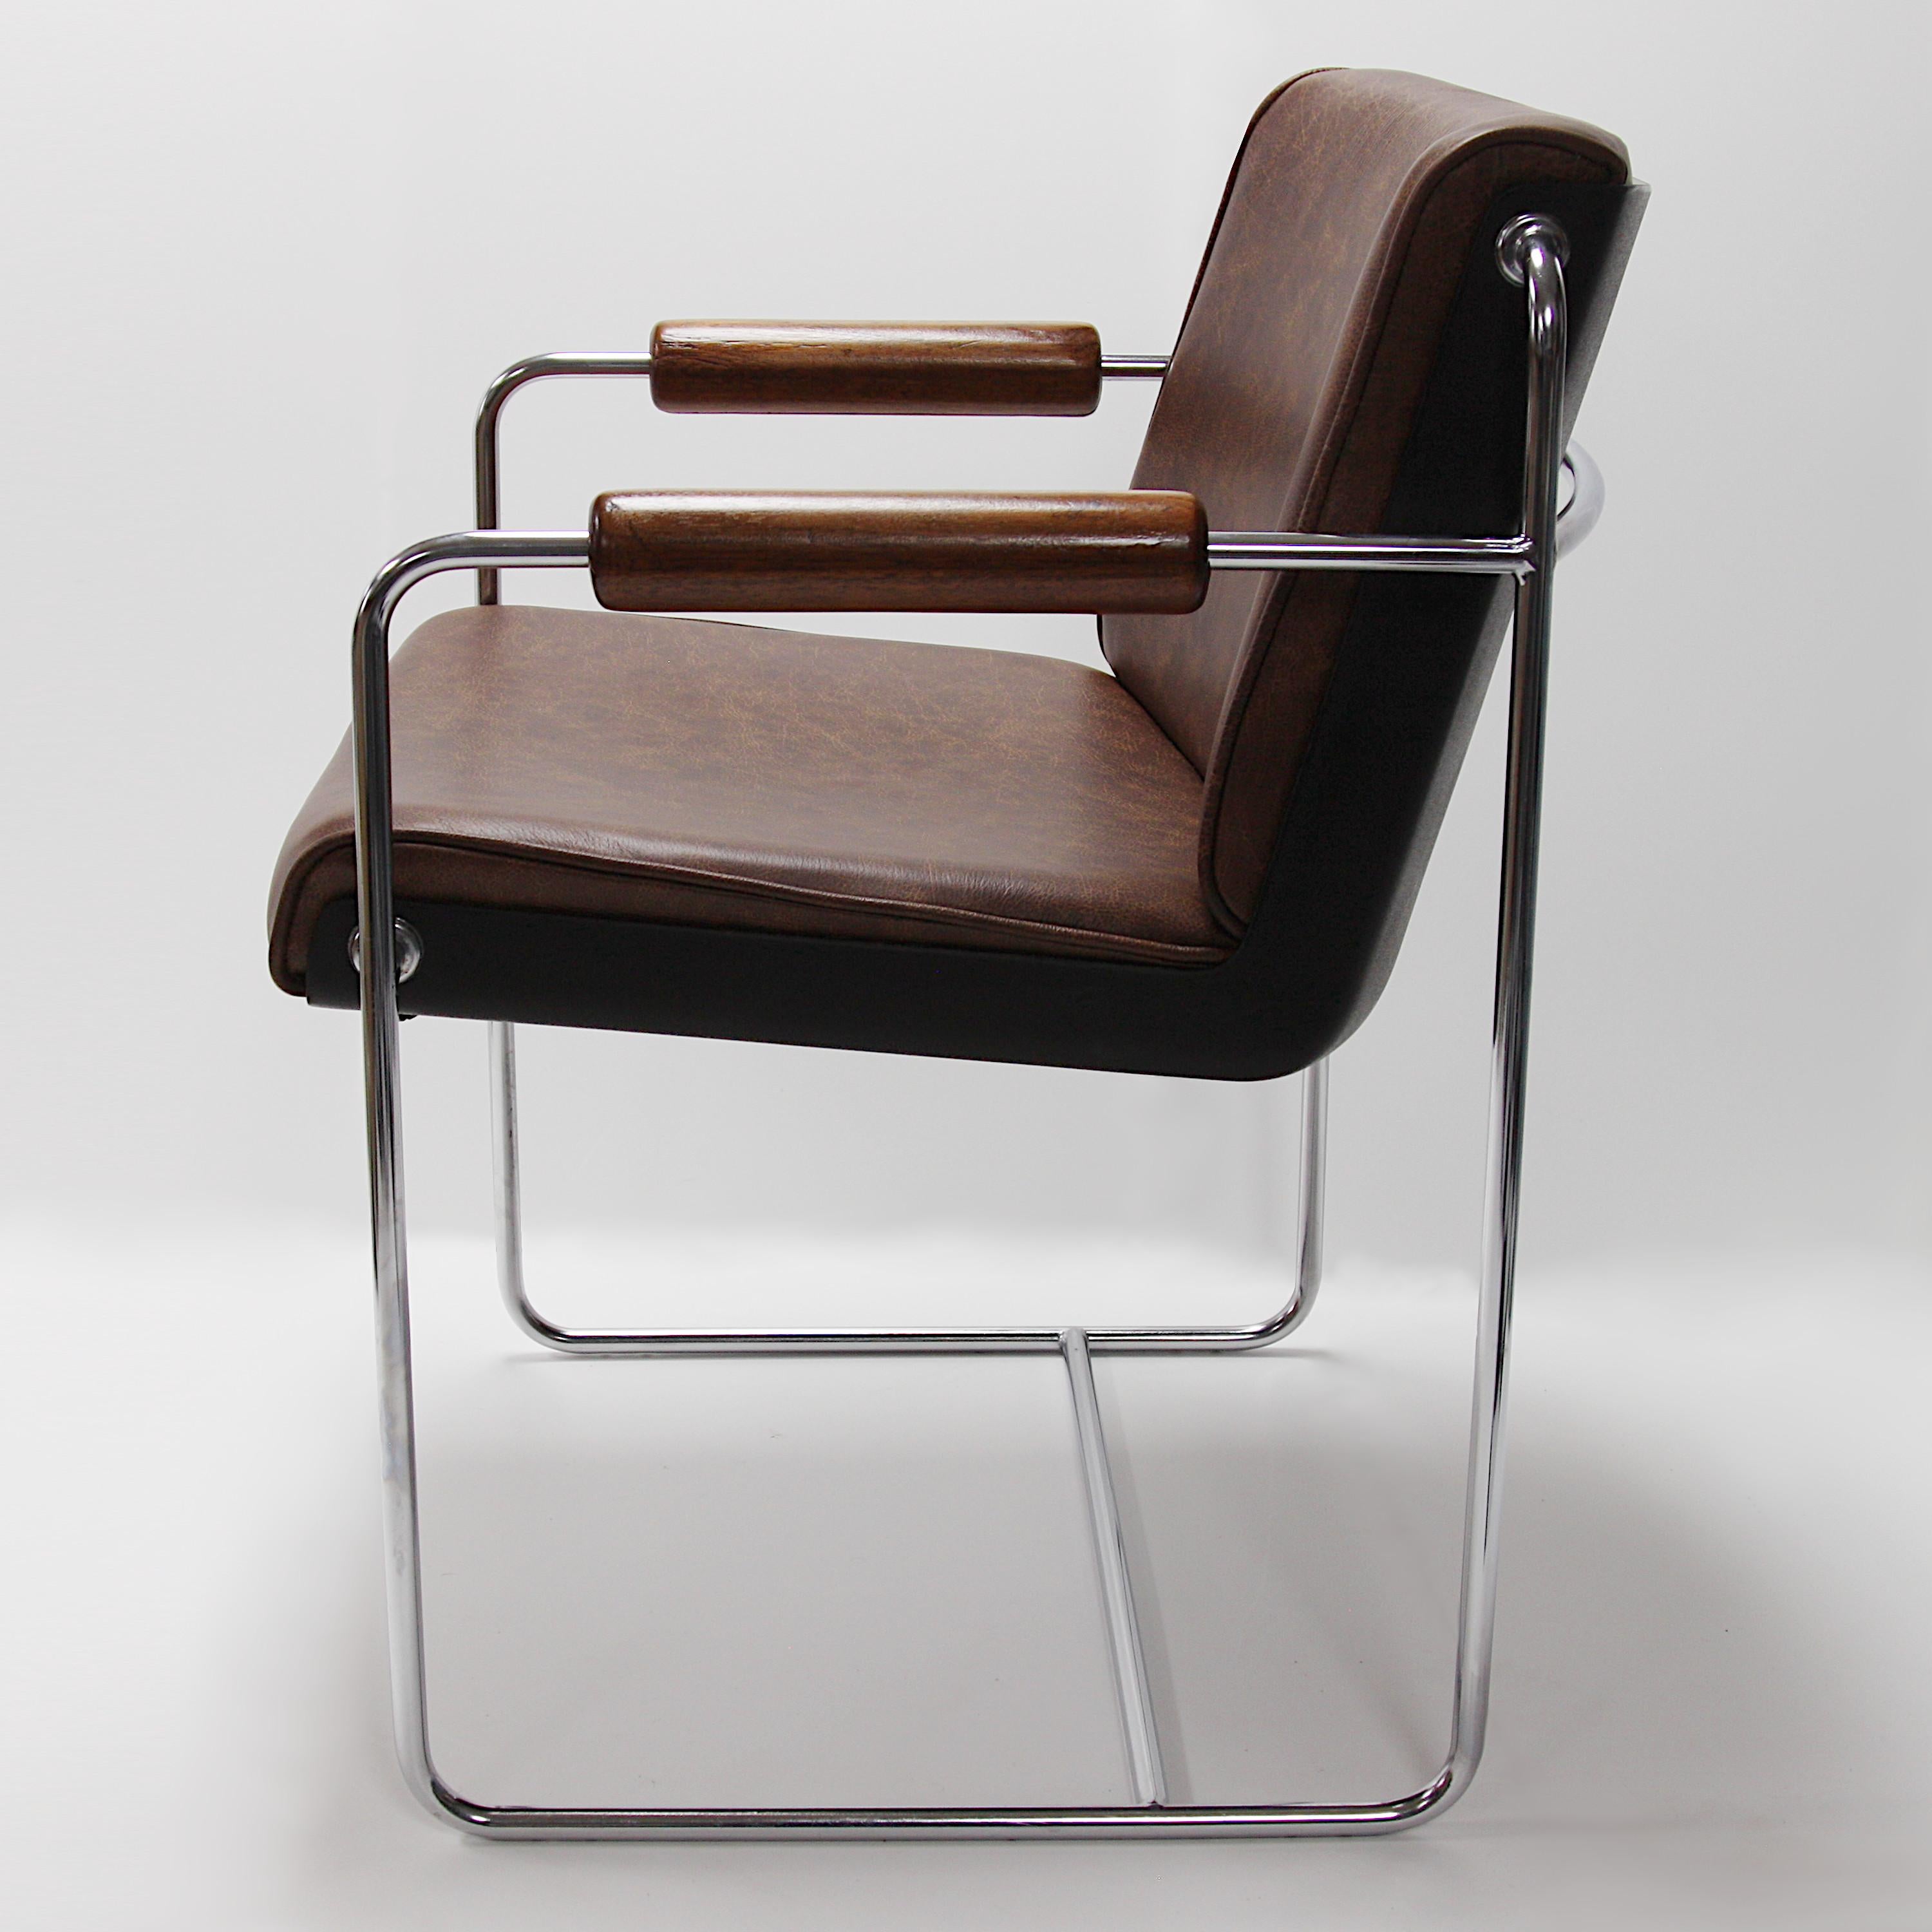 Rare Pair of Mid-Century Modern Fiberglass and Brown Leather Shell Lounge Chairs For Sale 4